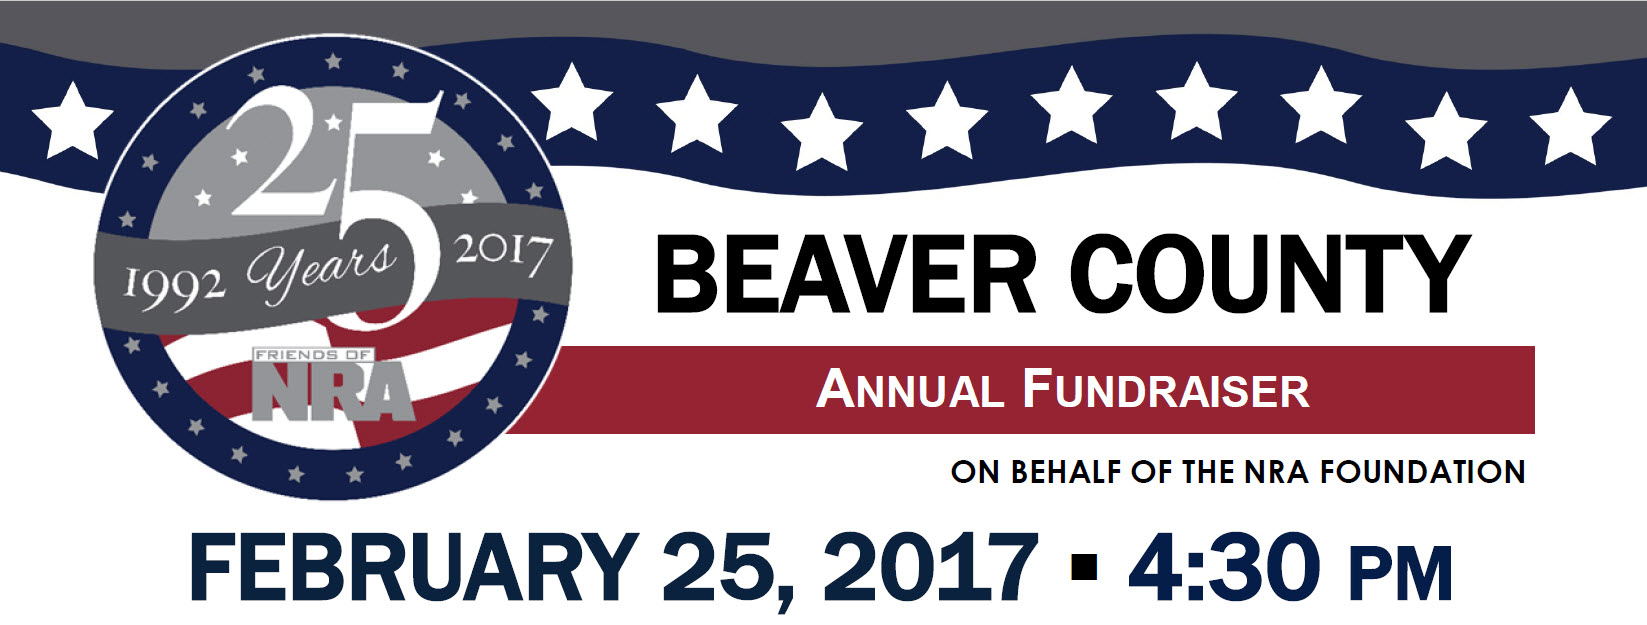 Beaver County Annual Fundraiser Friends of NRA